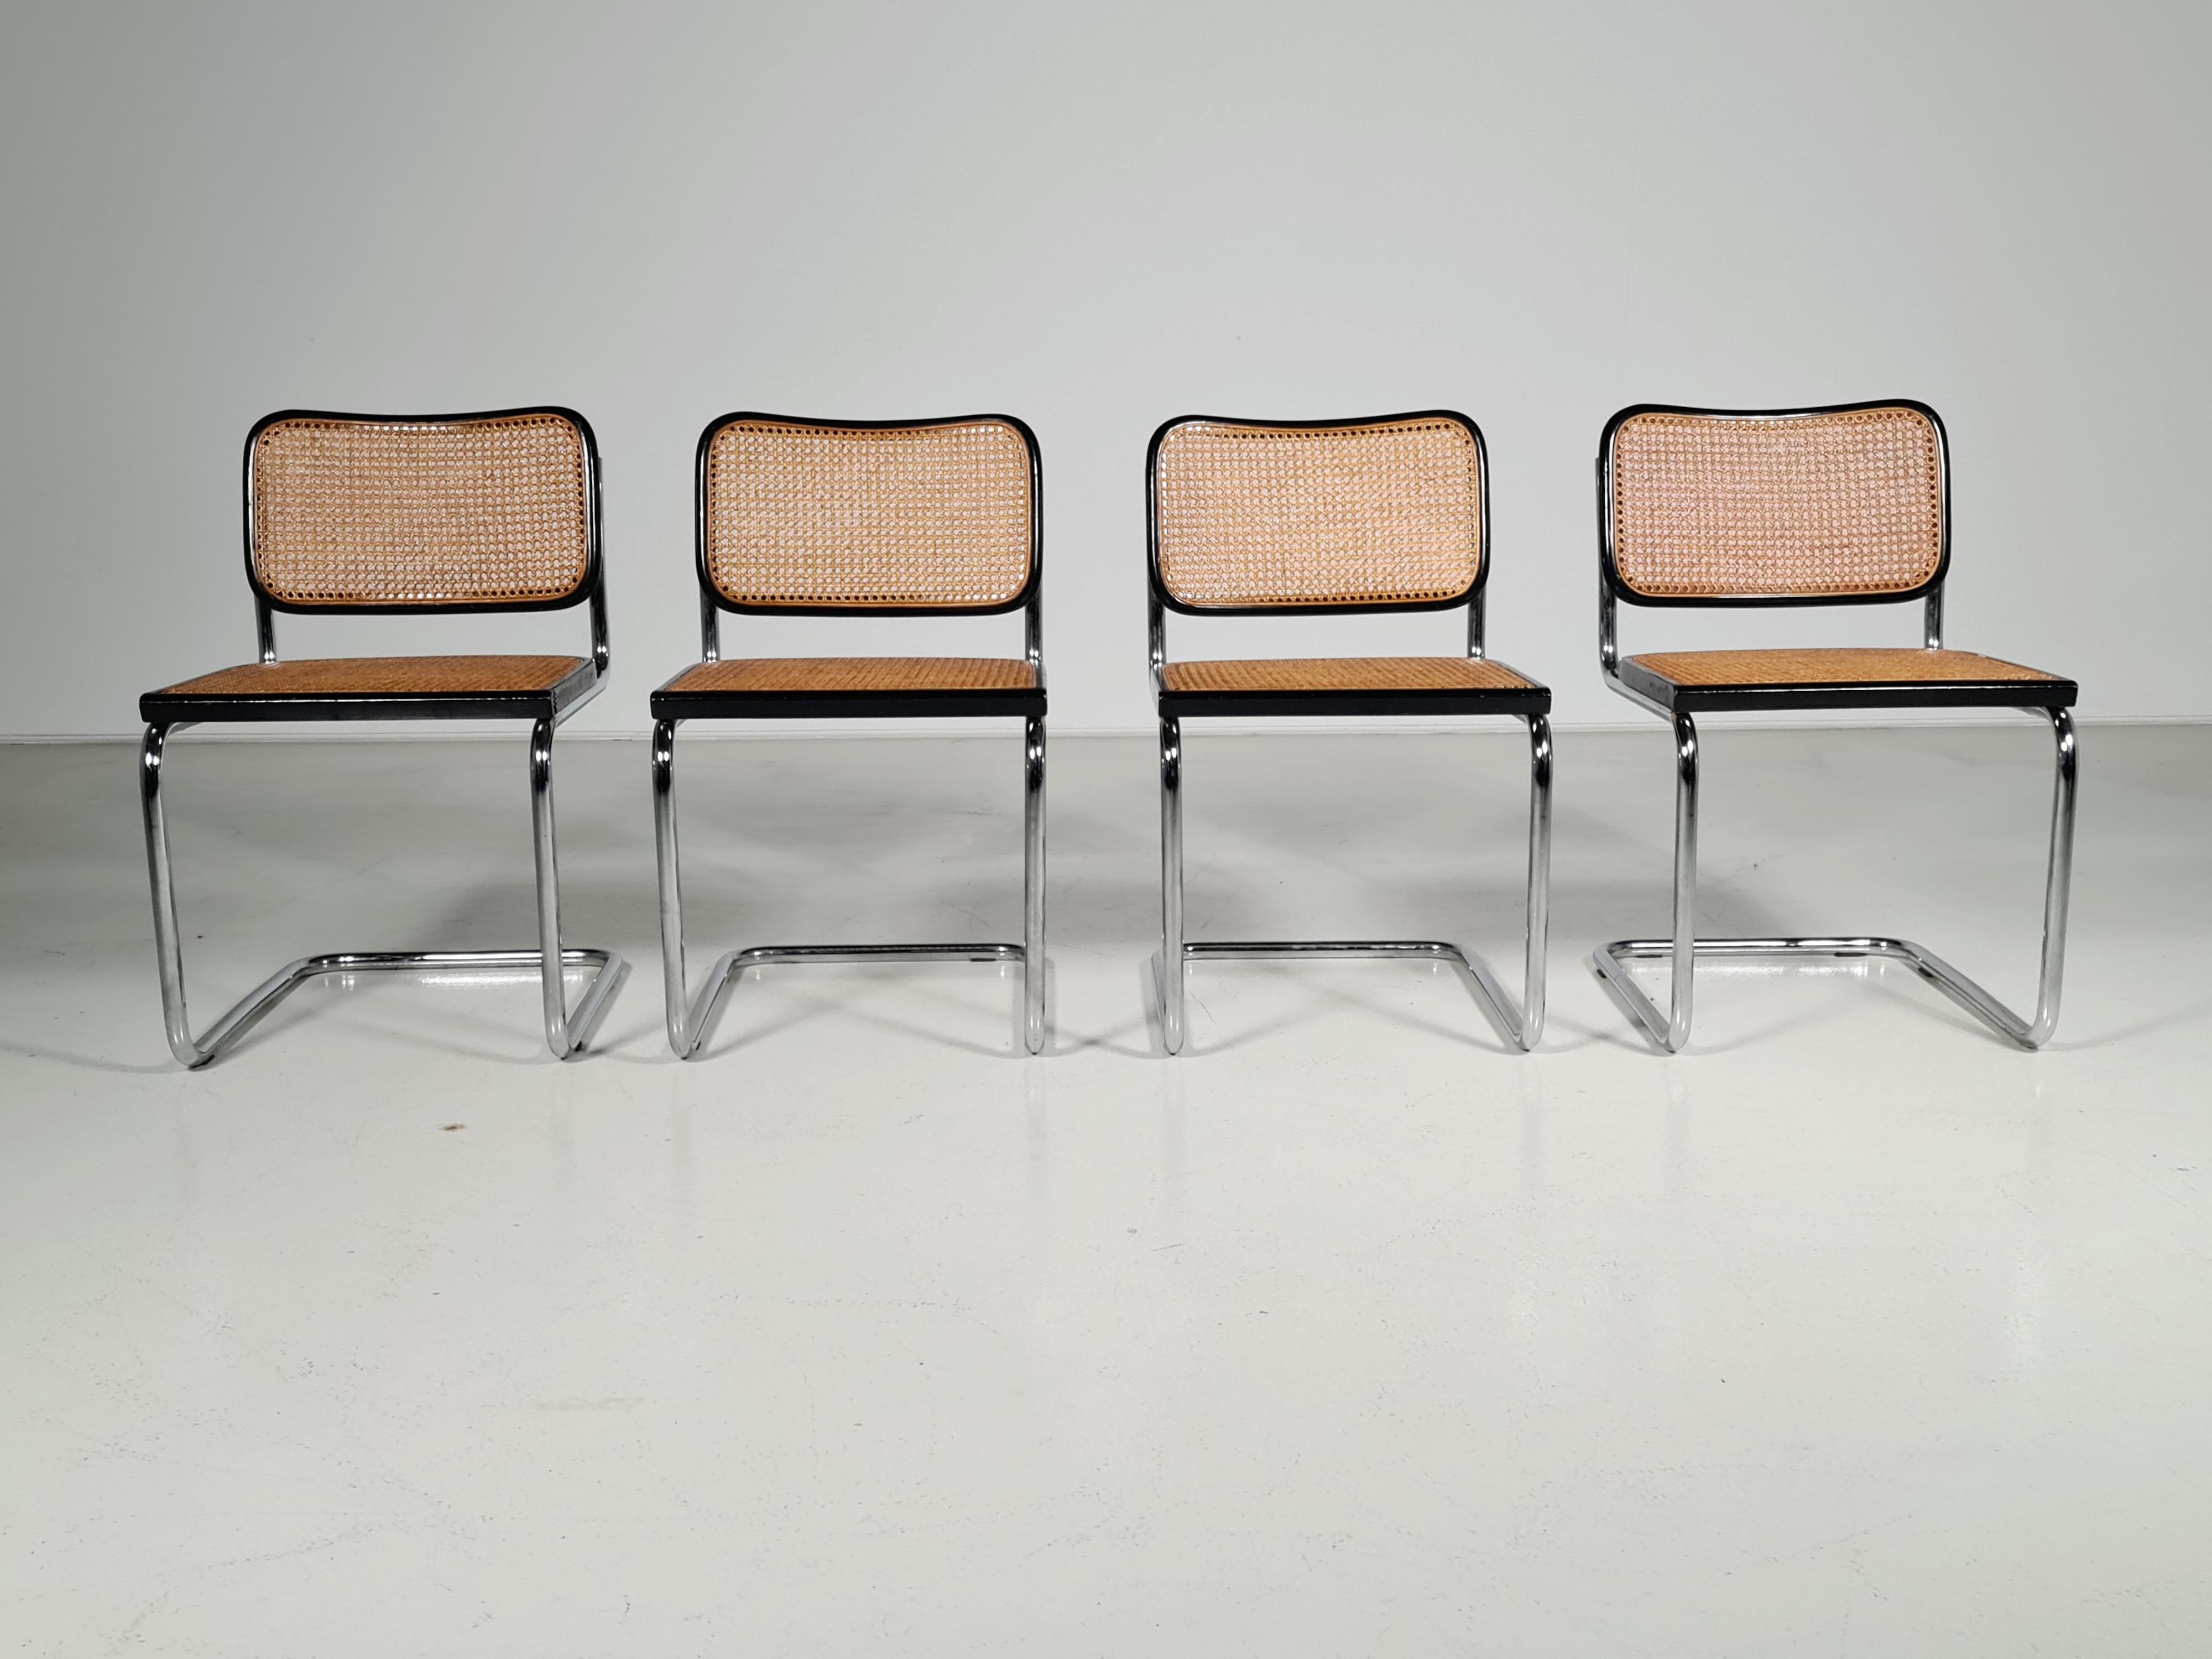 Cescar chairs, Marcel Breuer, Gavina, 1970

Set of 4 Cesca chairs designed in 1928 by Marcel Breuer, using tubular steel. It was named Cesca as a tribute to Breuer’s adopted daughter Francesca. These chairs are produced by Gavina in the 1970s.